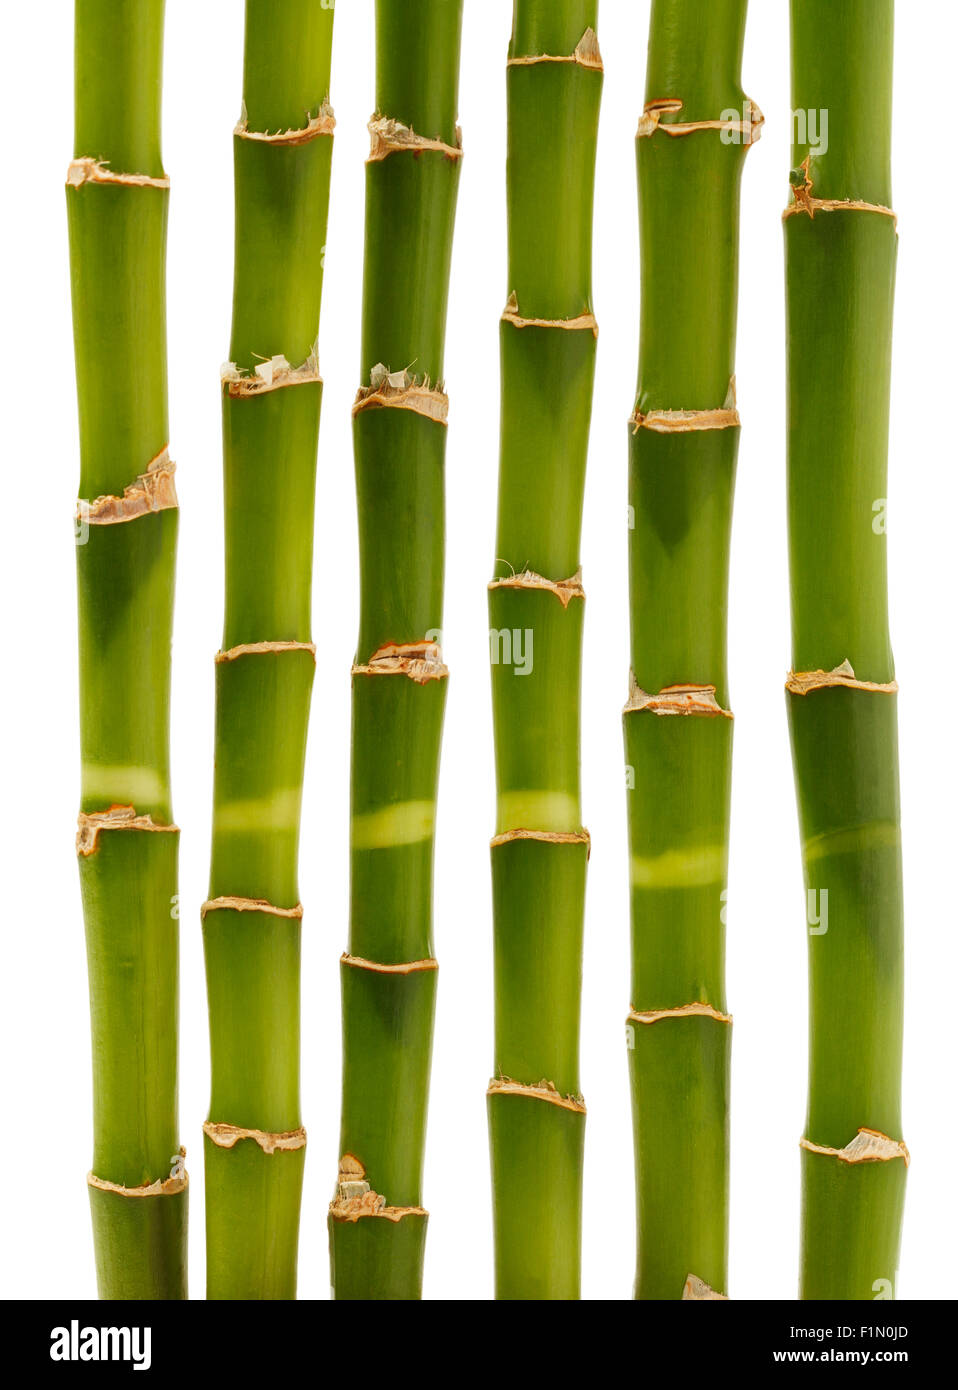 Green Bamboo Sections Isolated on a White Background. Stock Photo